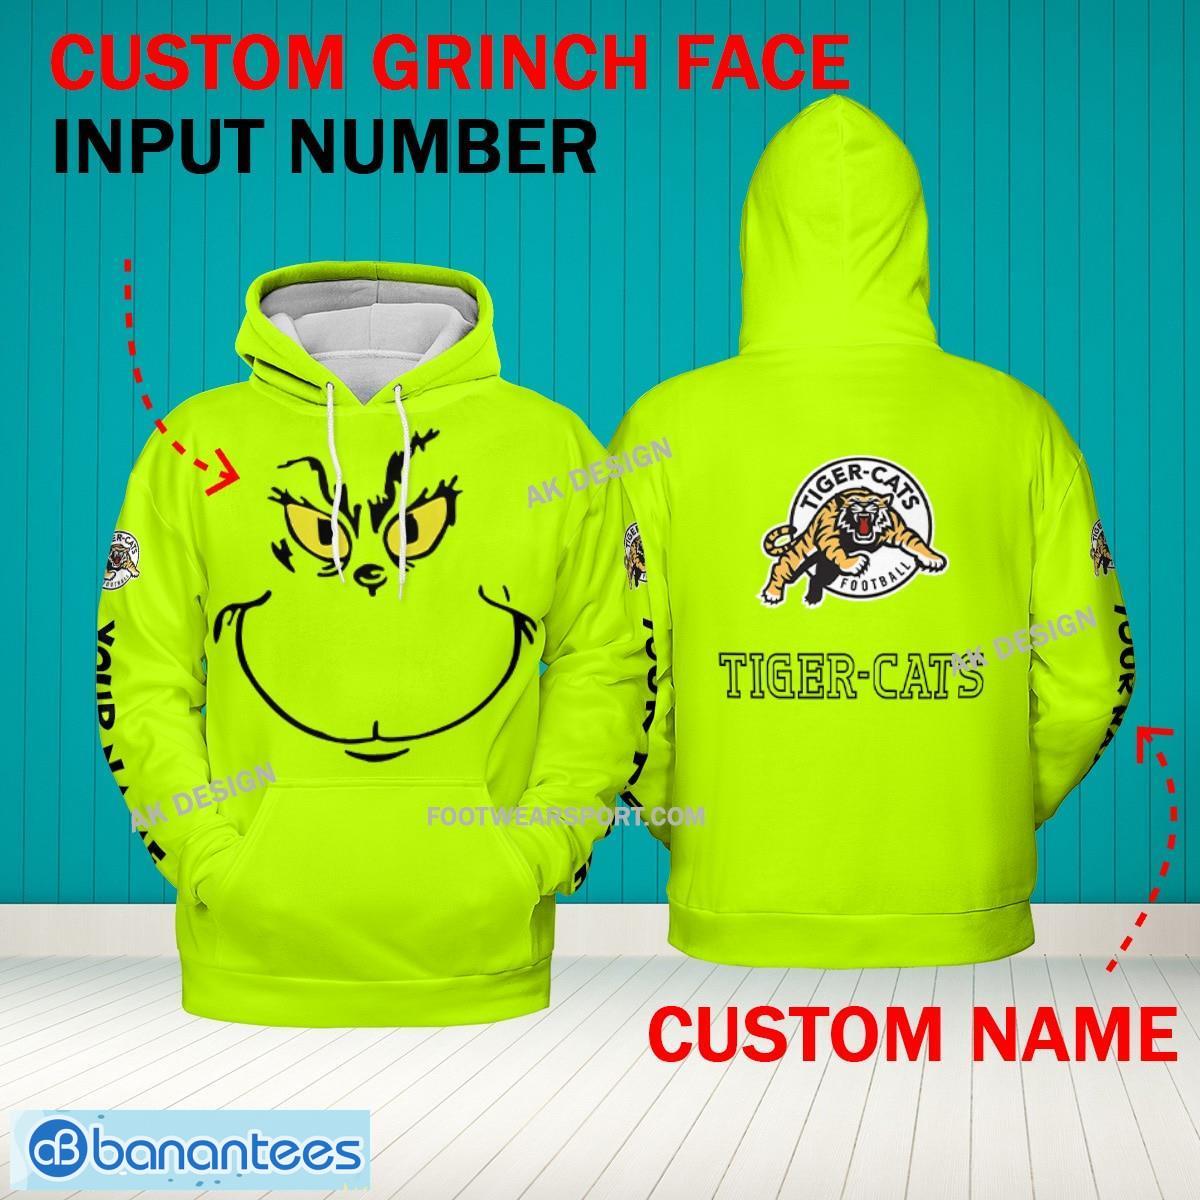 Grinch Face Hamilton Tiger Cats 3D Hoodie, Zip Hoodie, Sweater Green AOP Custom Number And Name - Grinch Face CFL Hamilton Tiger Cats 3D Hoodie